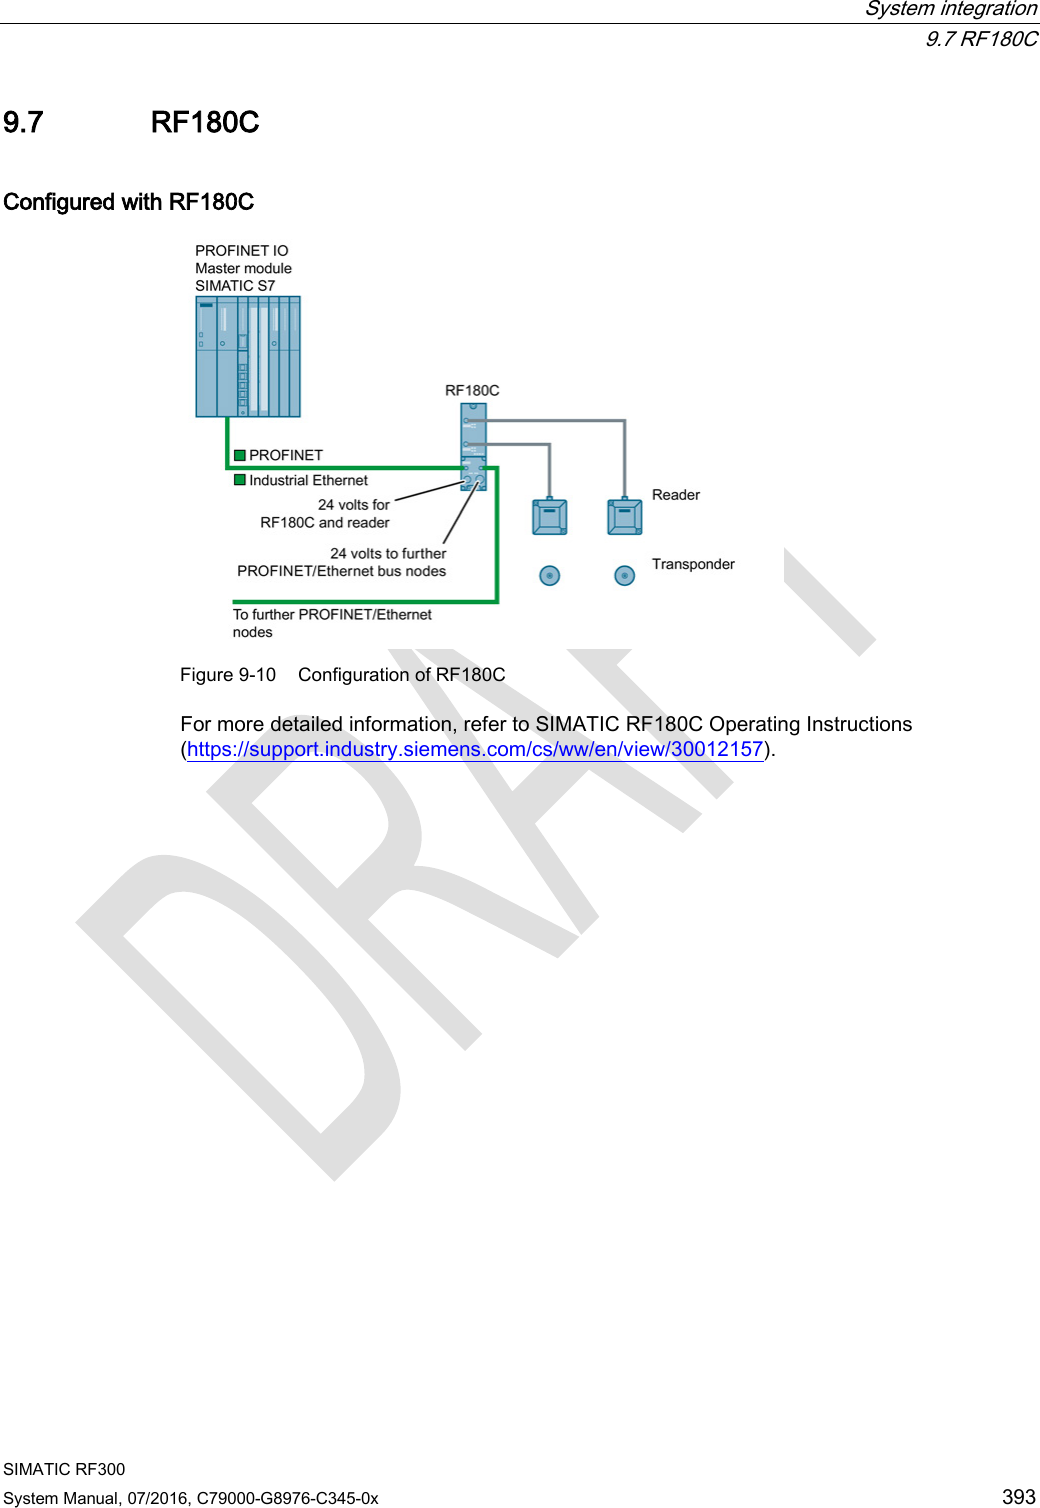  System integration  9.7 RF180C SIMATIC RF300 System Manual, 07/2016, C79000-G8976-C345-0x 393 9.7 RF180C Configured with RF180C  Figure 9-10 Configuration of RF180C For more detailed information, refer to SIMATIC RF180C Operating Instructions (https://support.industry.siemens.com/cs/ww/en/view/30012157). 